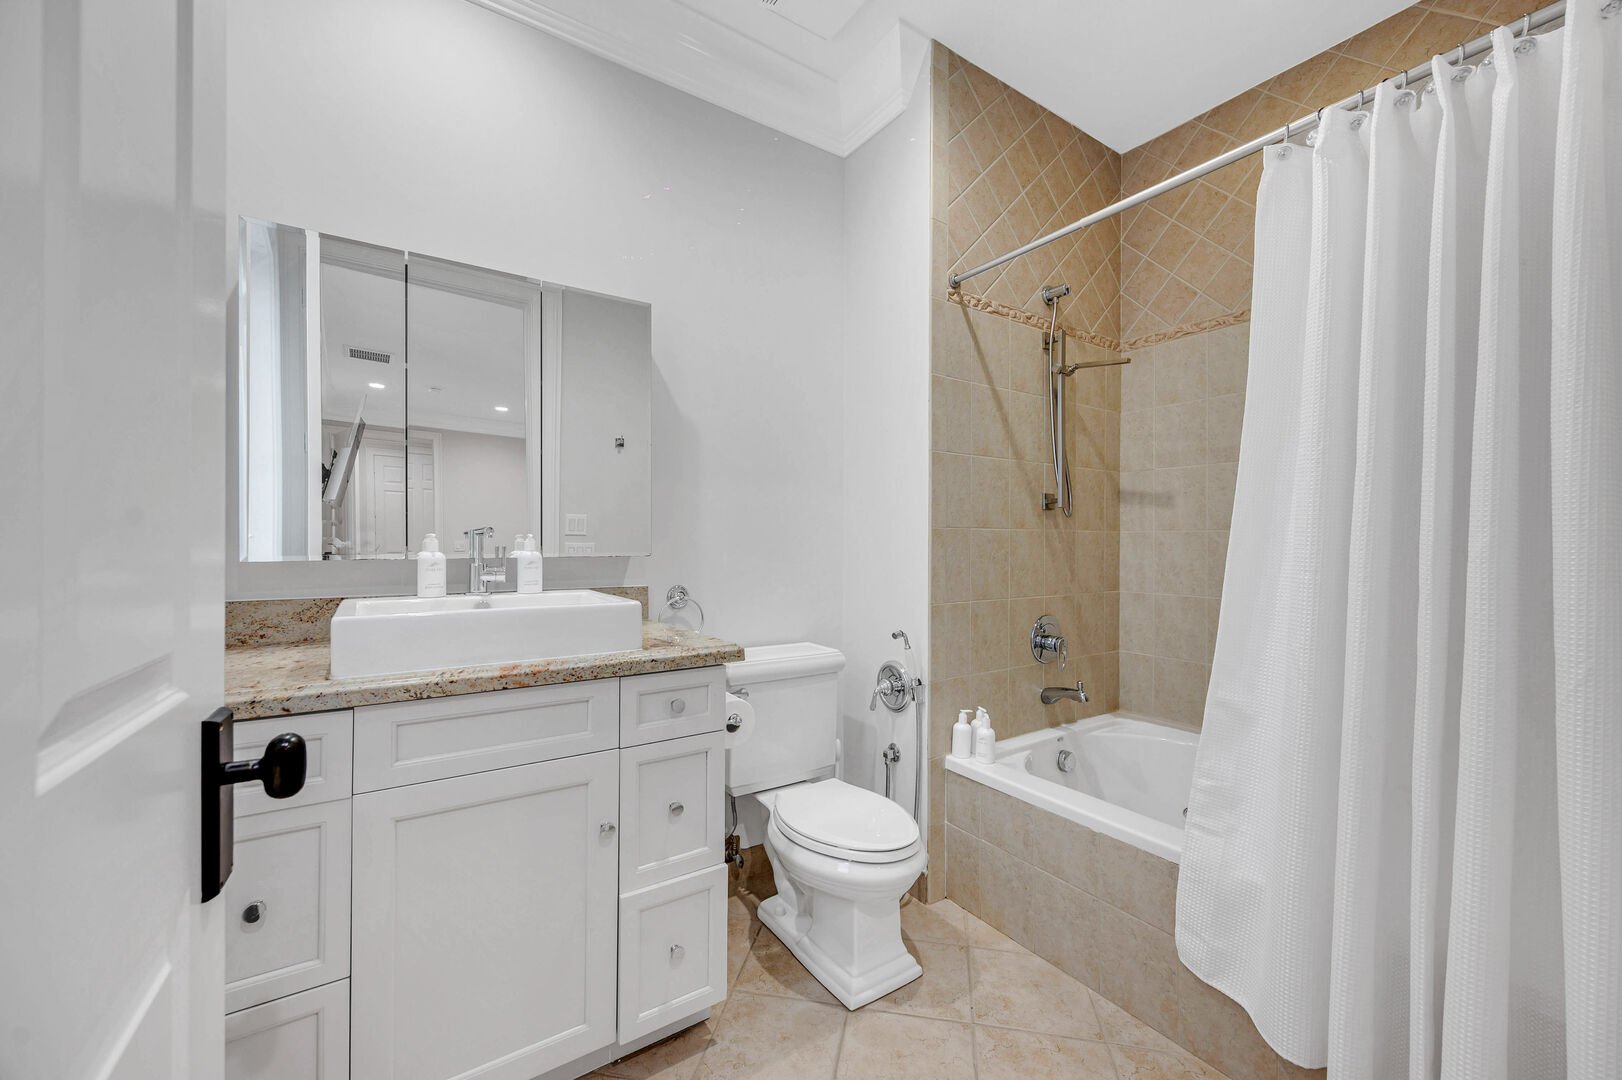 En-suite bathroom four features a tub and shower combo.